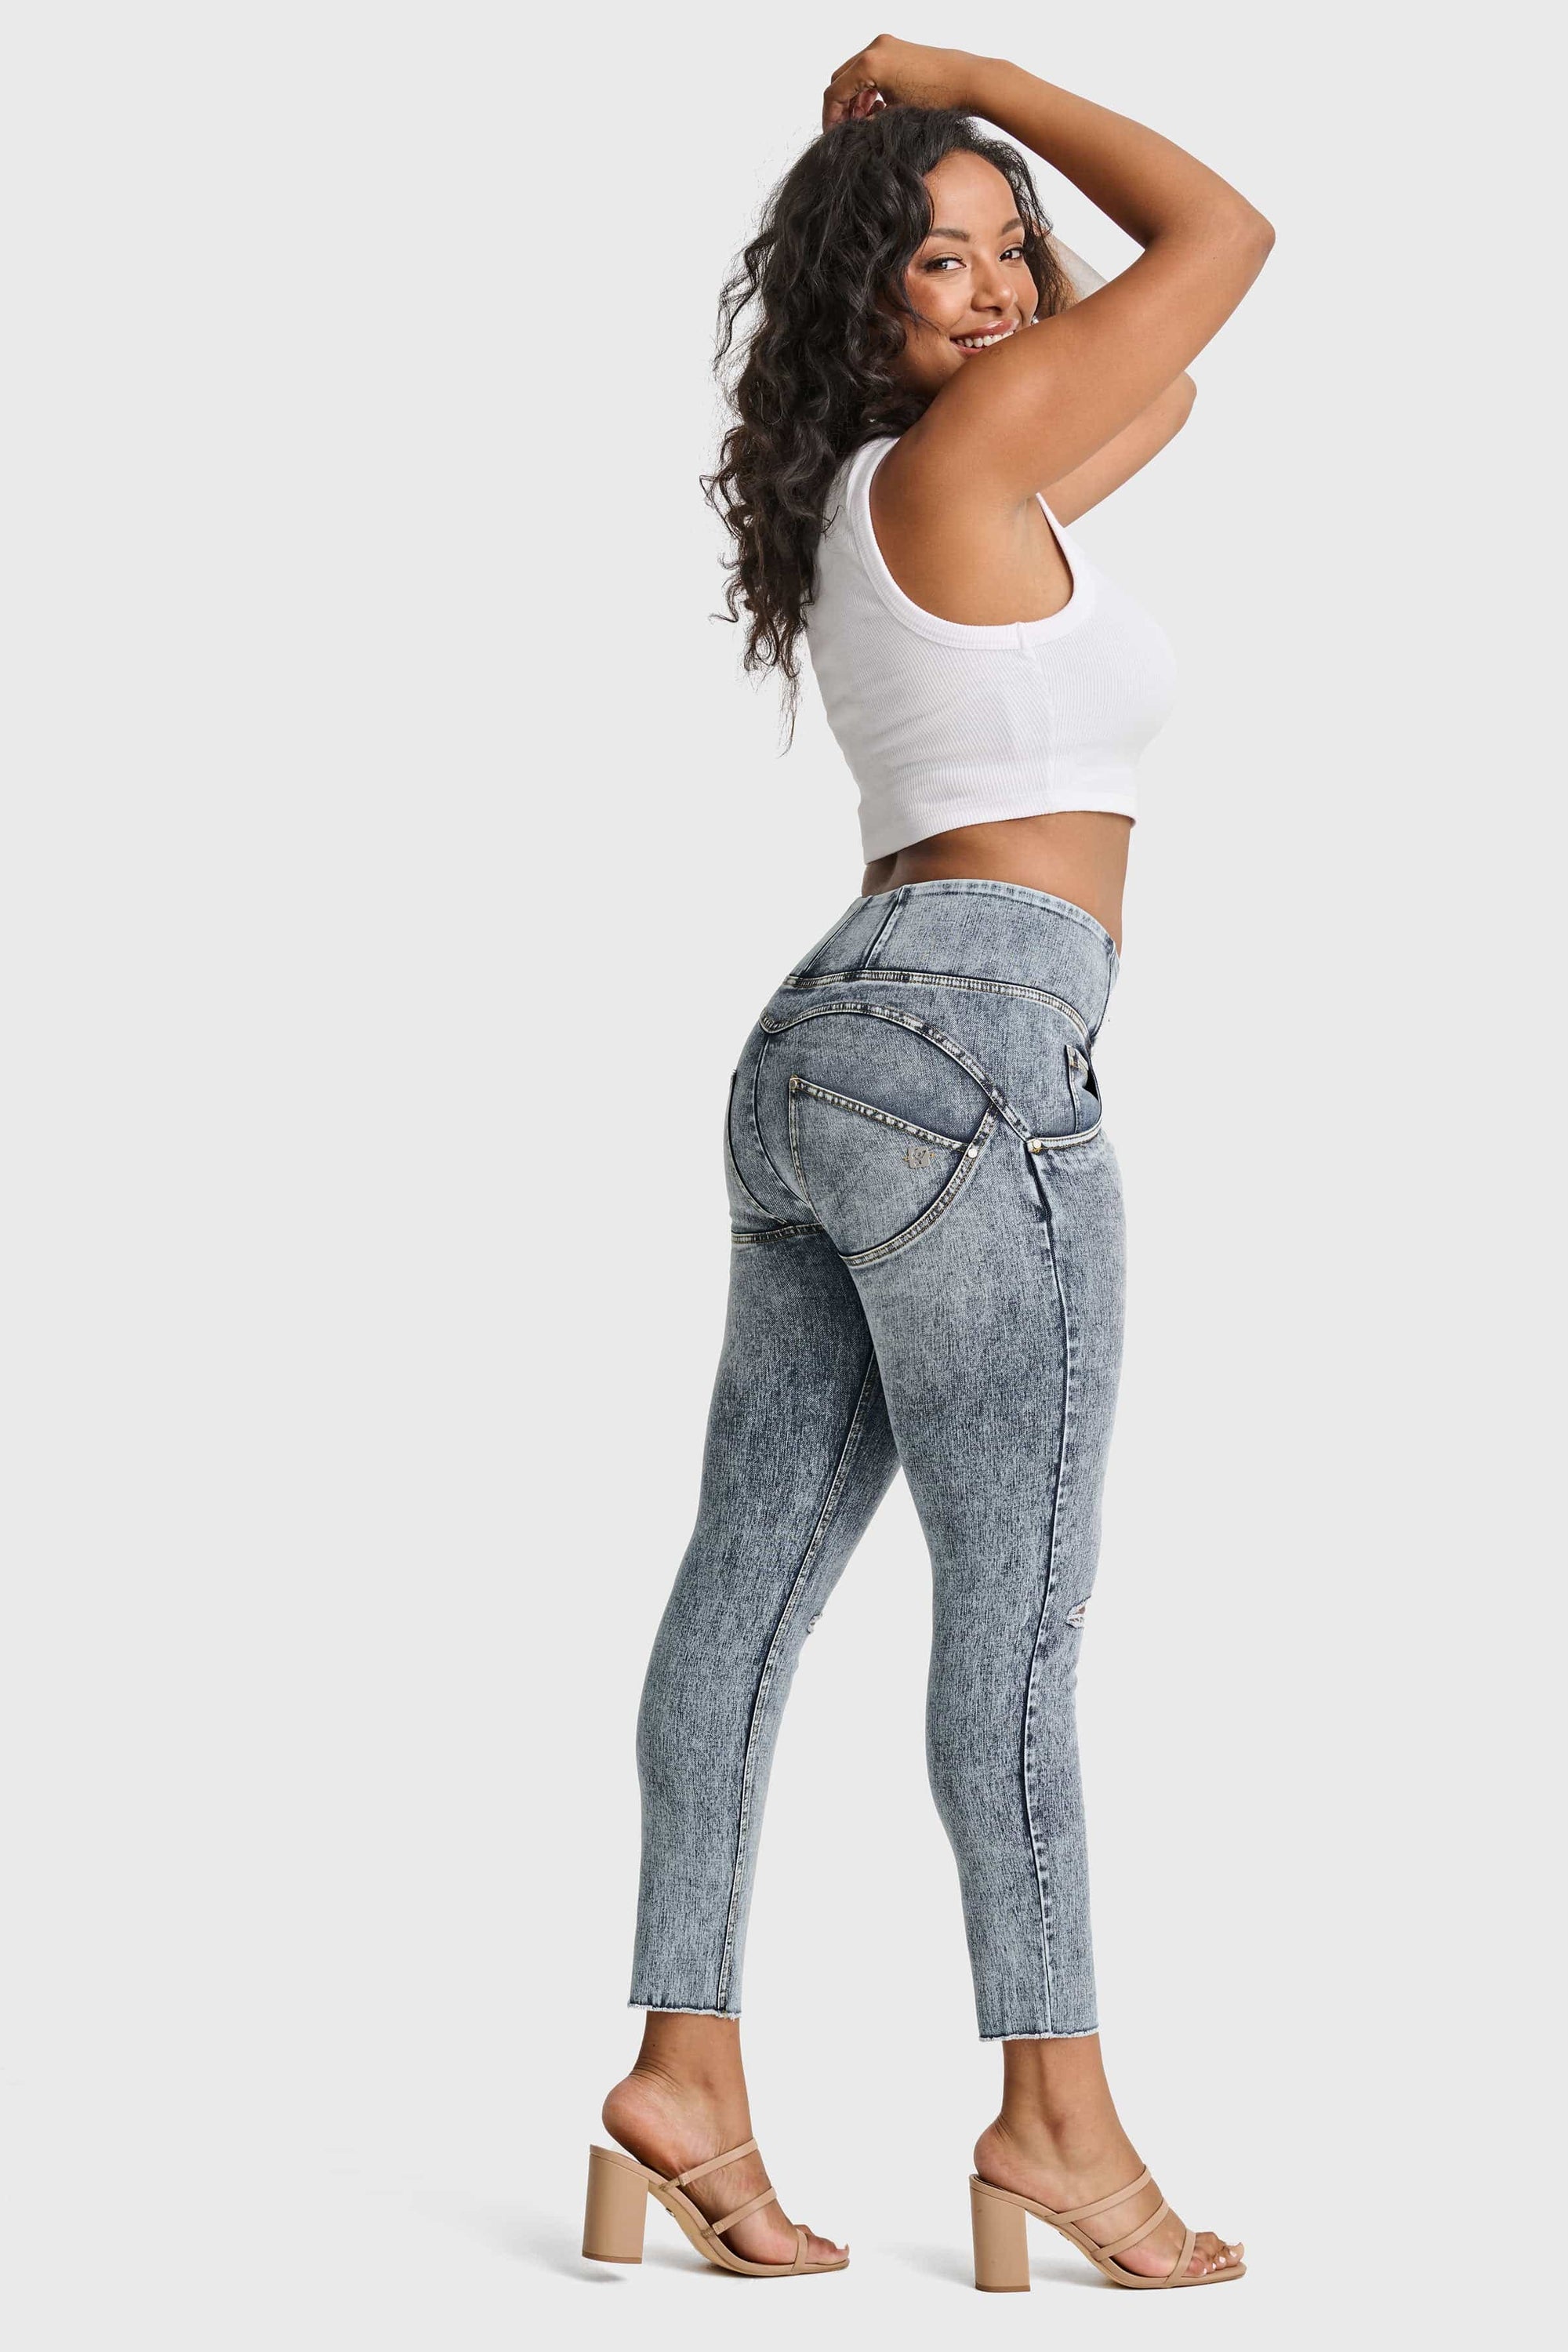 WR.UP® Snug Ripped Jeans - High Waisted - Petite Length - Blue Stonewash + Yellow Stitching 4